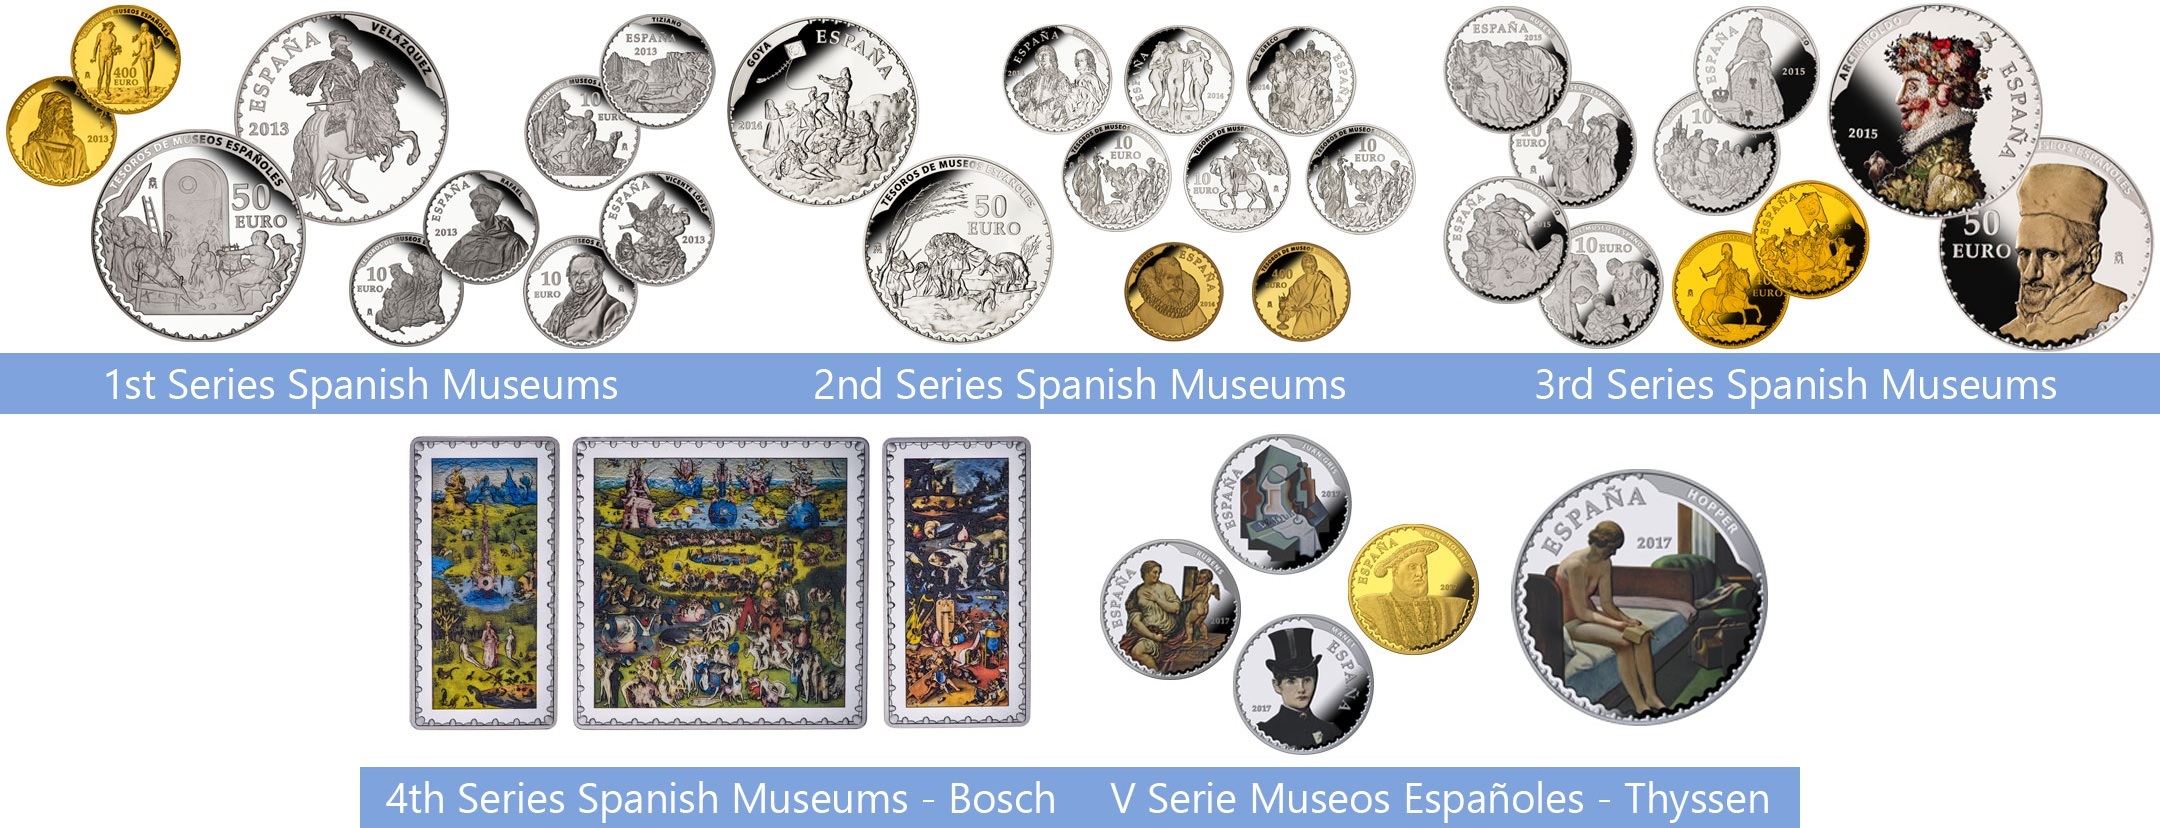 Spain Treasures of the Spanish museums 2013-2017 (shop illustration) (zoom)